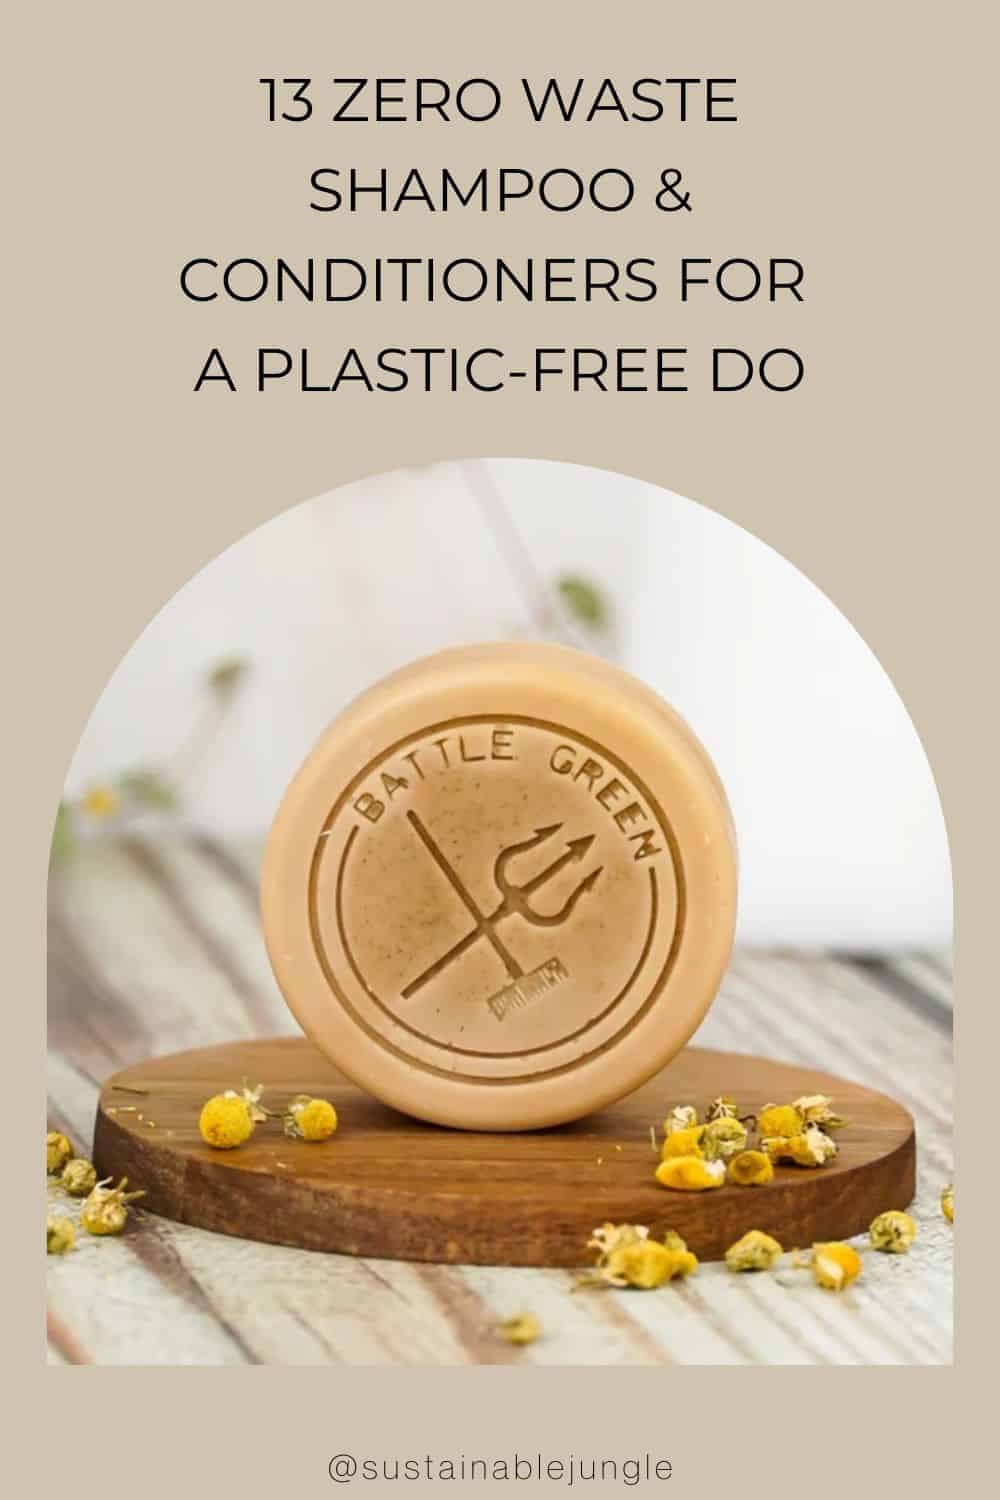 13 Zero Waste Shampoo & Conditioners For A Plastic-Free Do Image by Battle Green #zerowasteshampooandconditioner #zerowasteshampoobars #zerowasteshampoo #sustainableshampoo #bestsustainableshampooandconditioner #sustainableshampoobrands #sustainablejungle